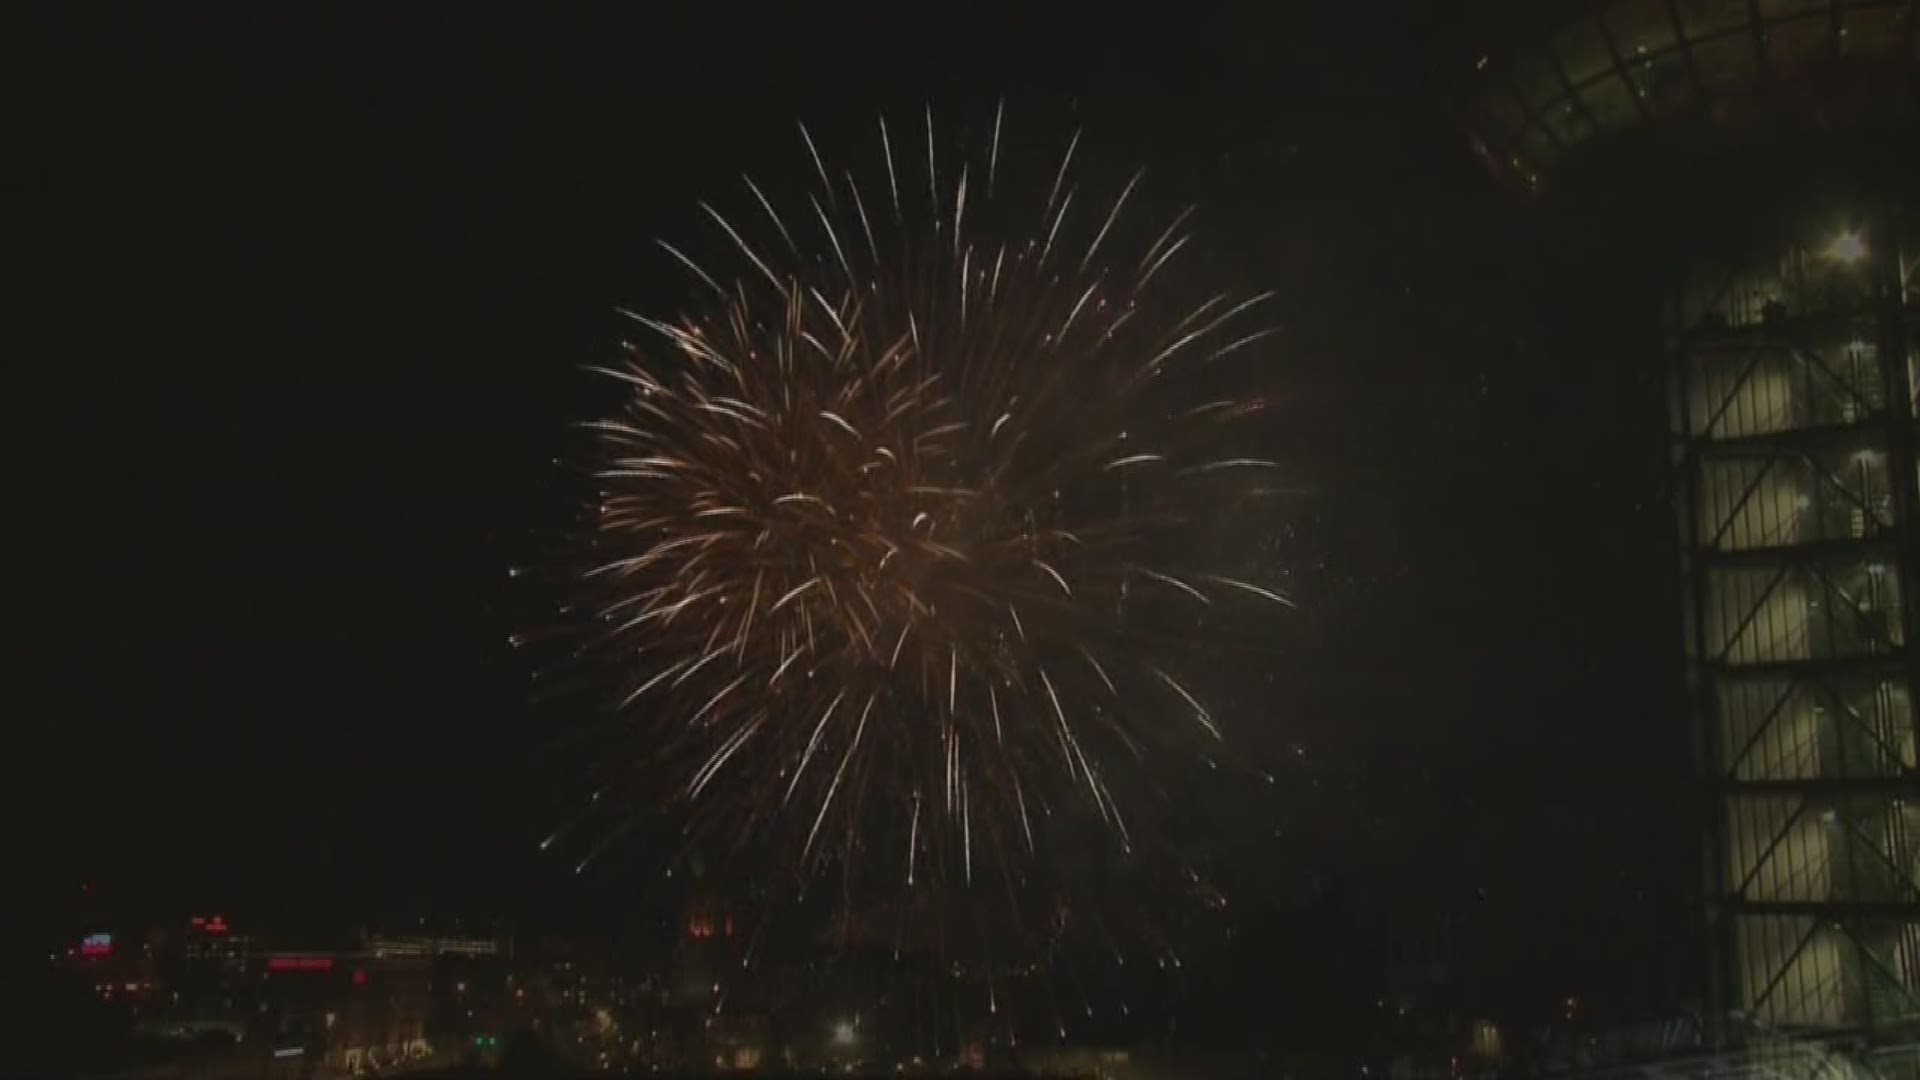 Rewatch the 2019 Festival on the 4th that aired on WBIR Channel 10 on July 4 from 8-10 p.m.